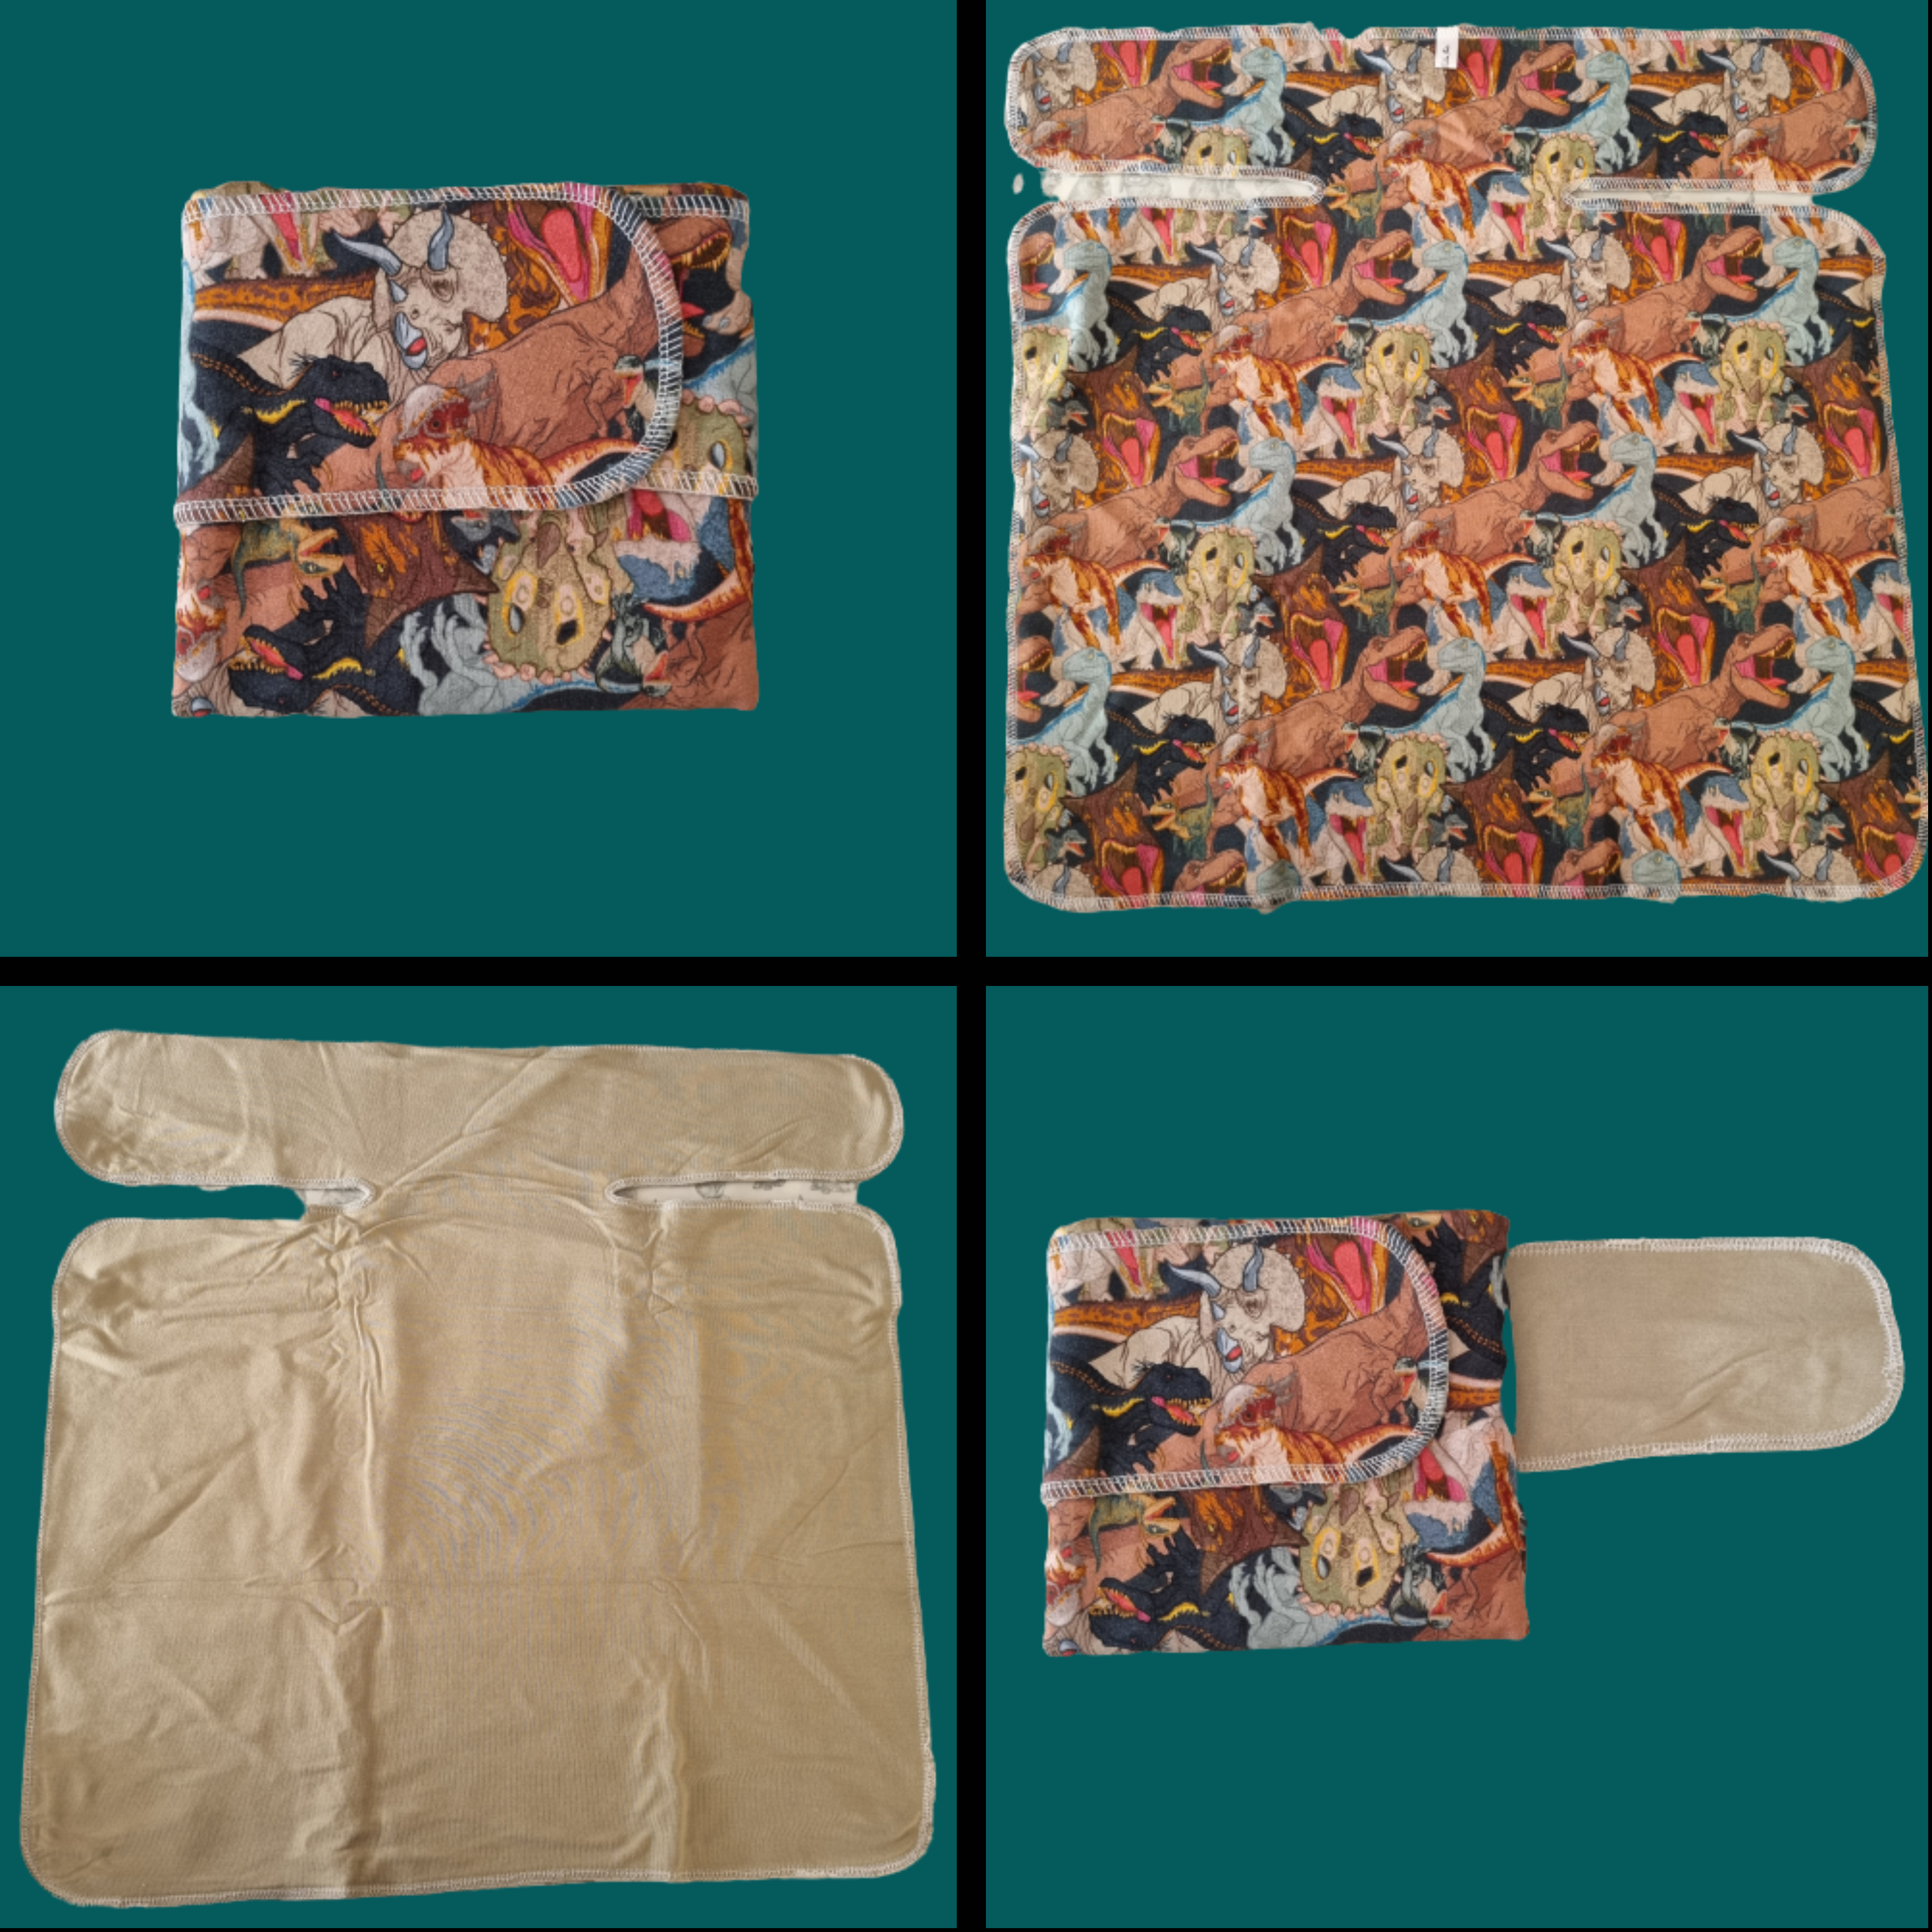 collage of preflat nappies with a dinosaur pattern